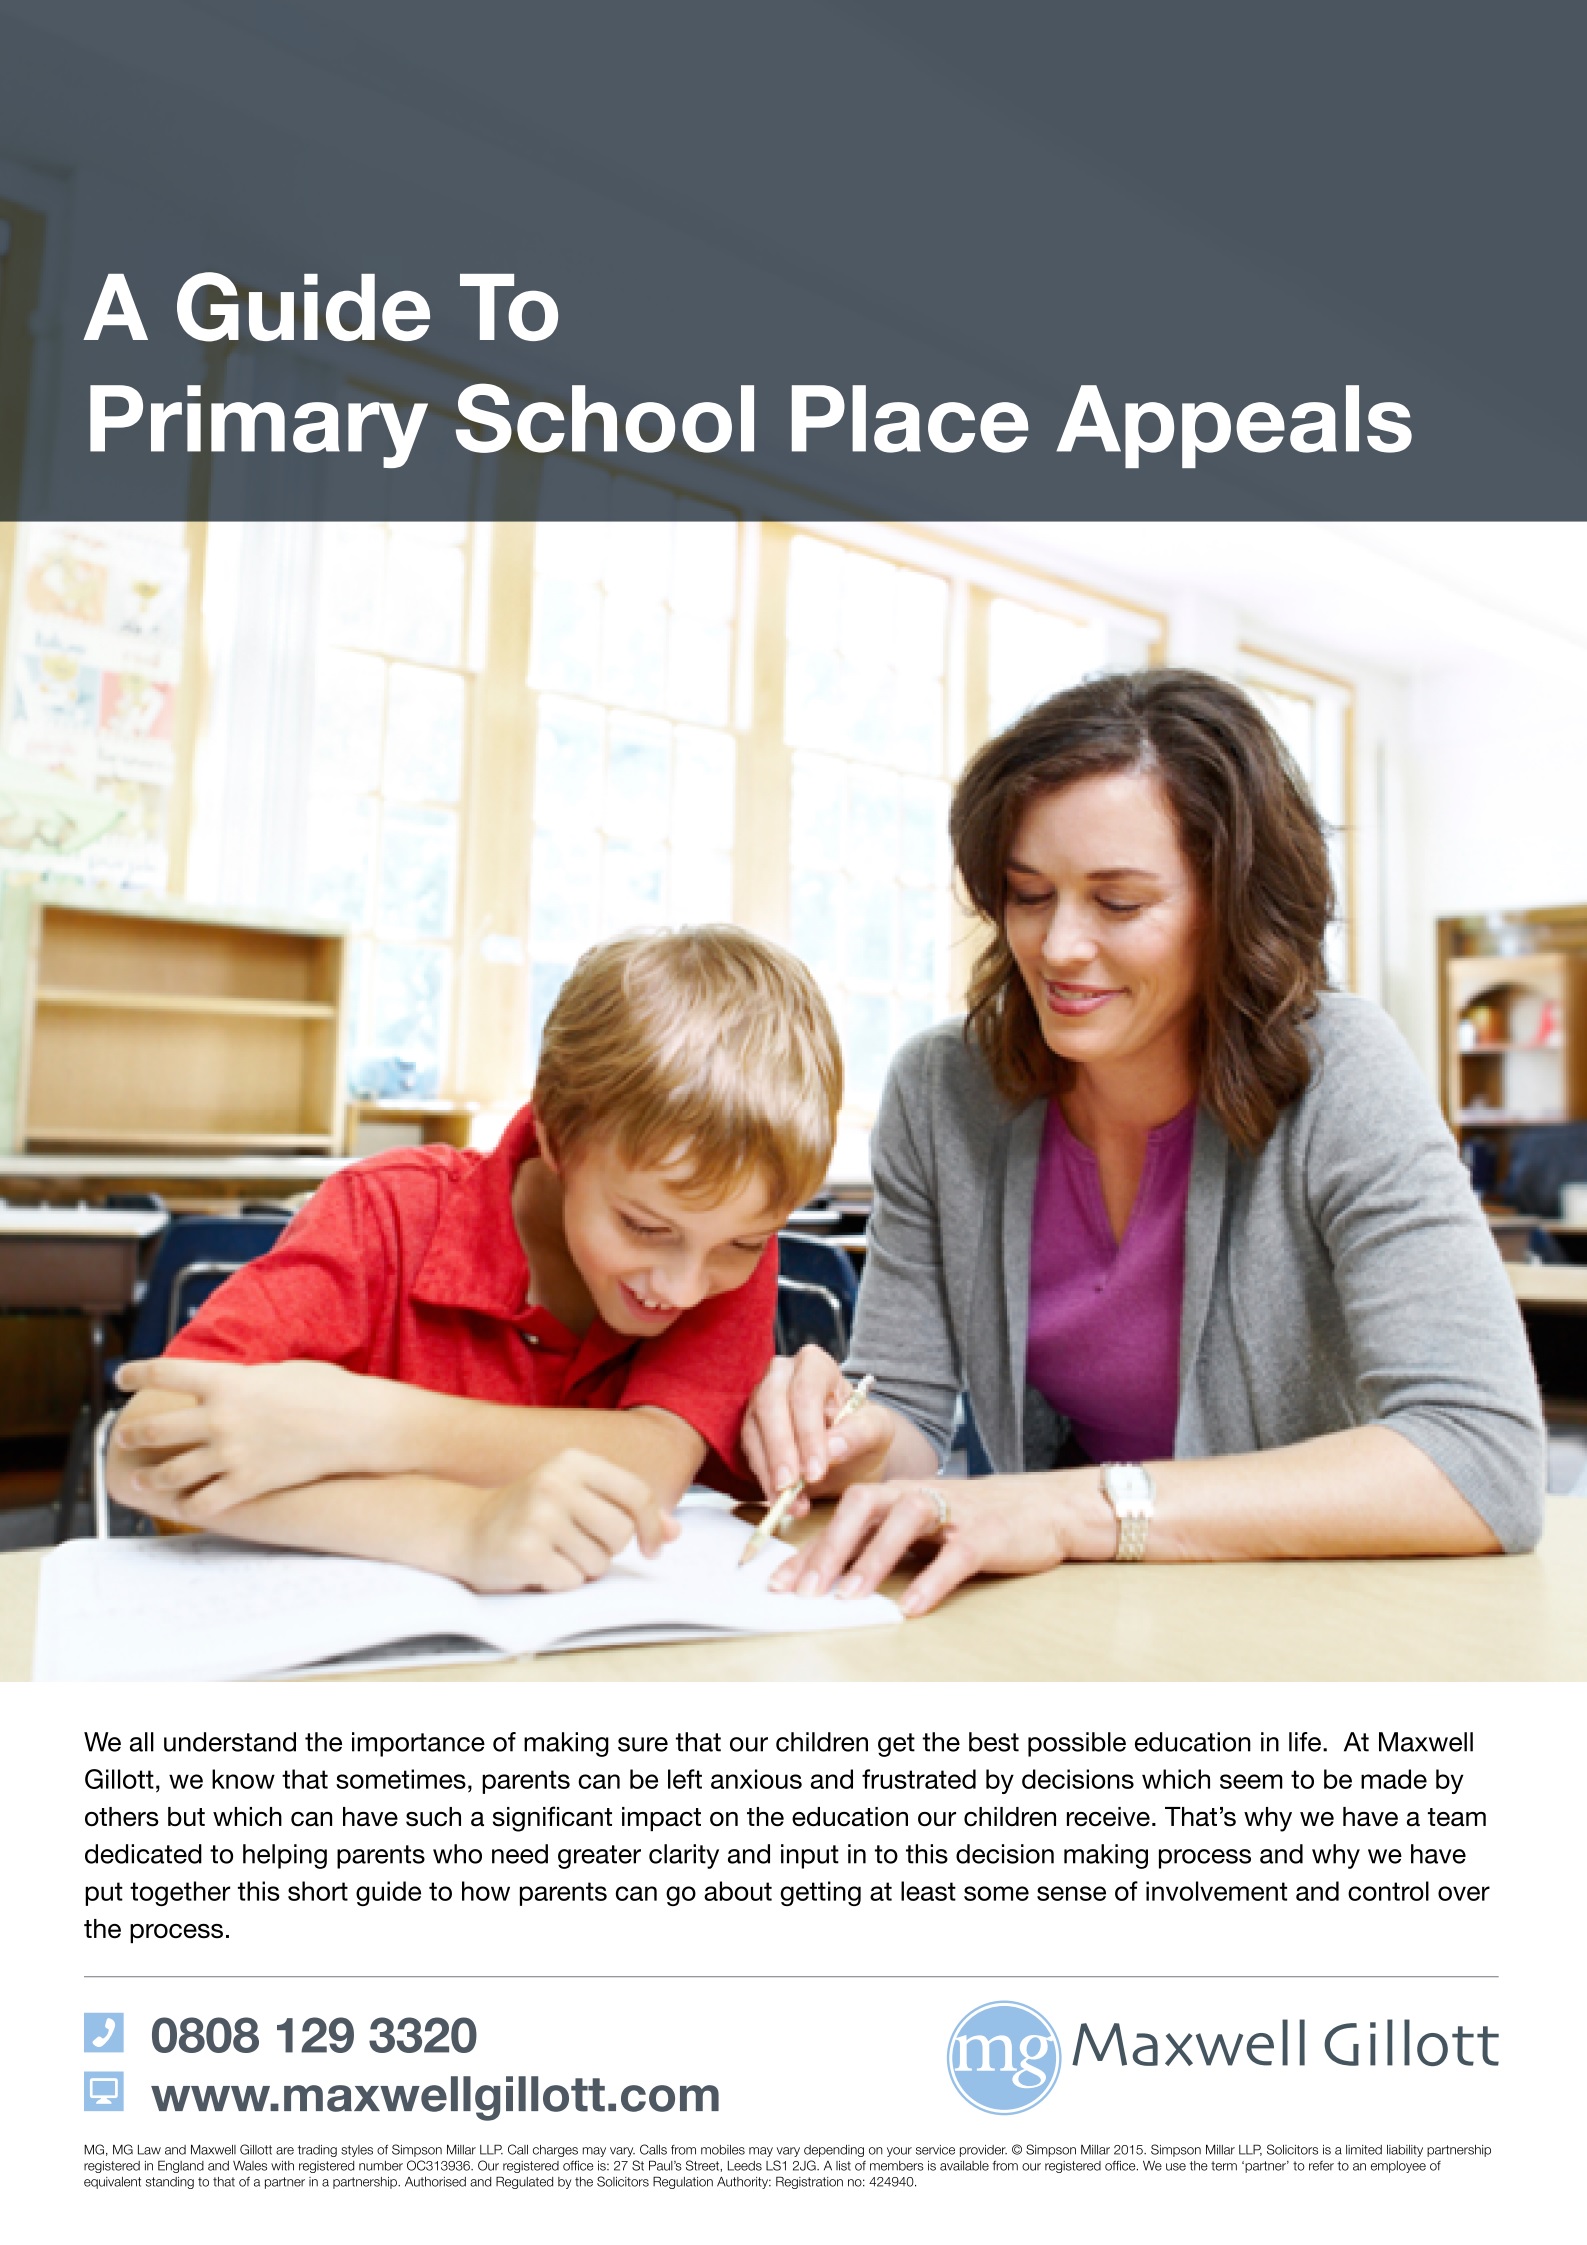 A Guide to Primary School Place Appeals